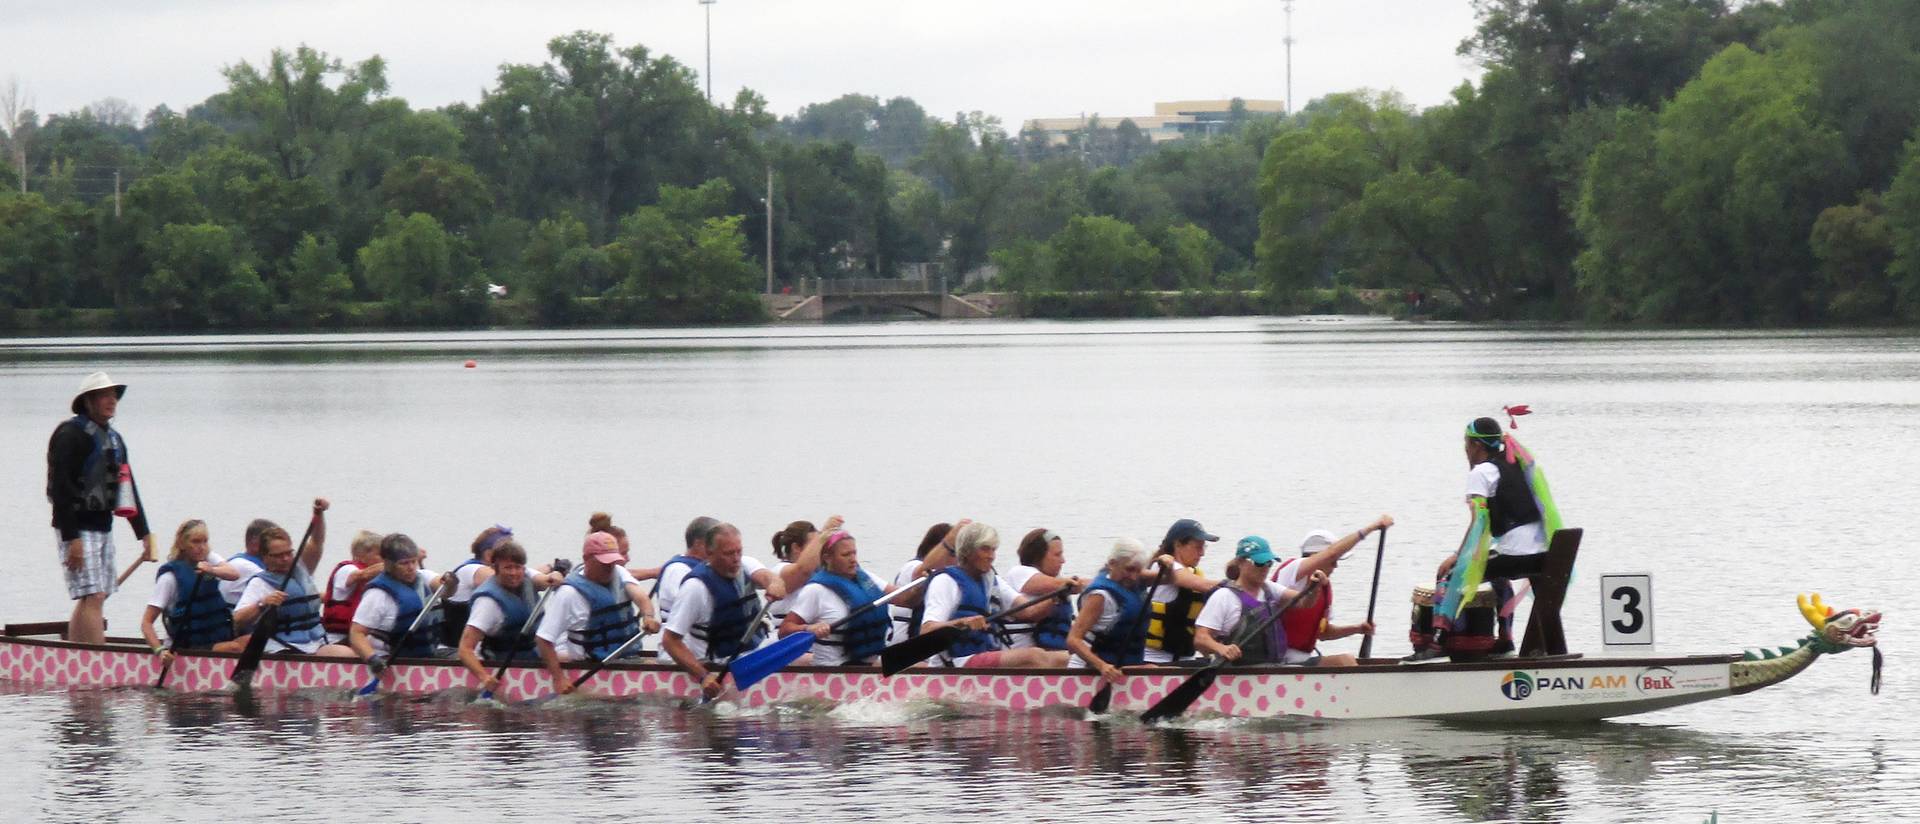 Dragon boat on Half Moon Lake in Eau Claire, WI